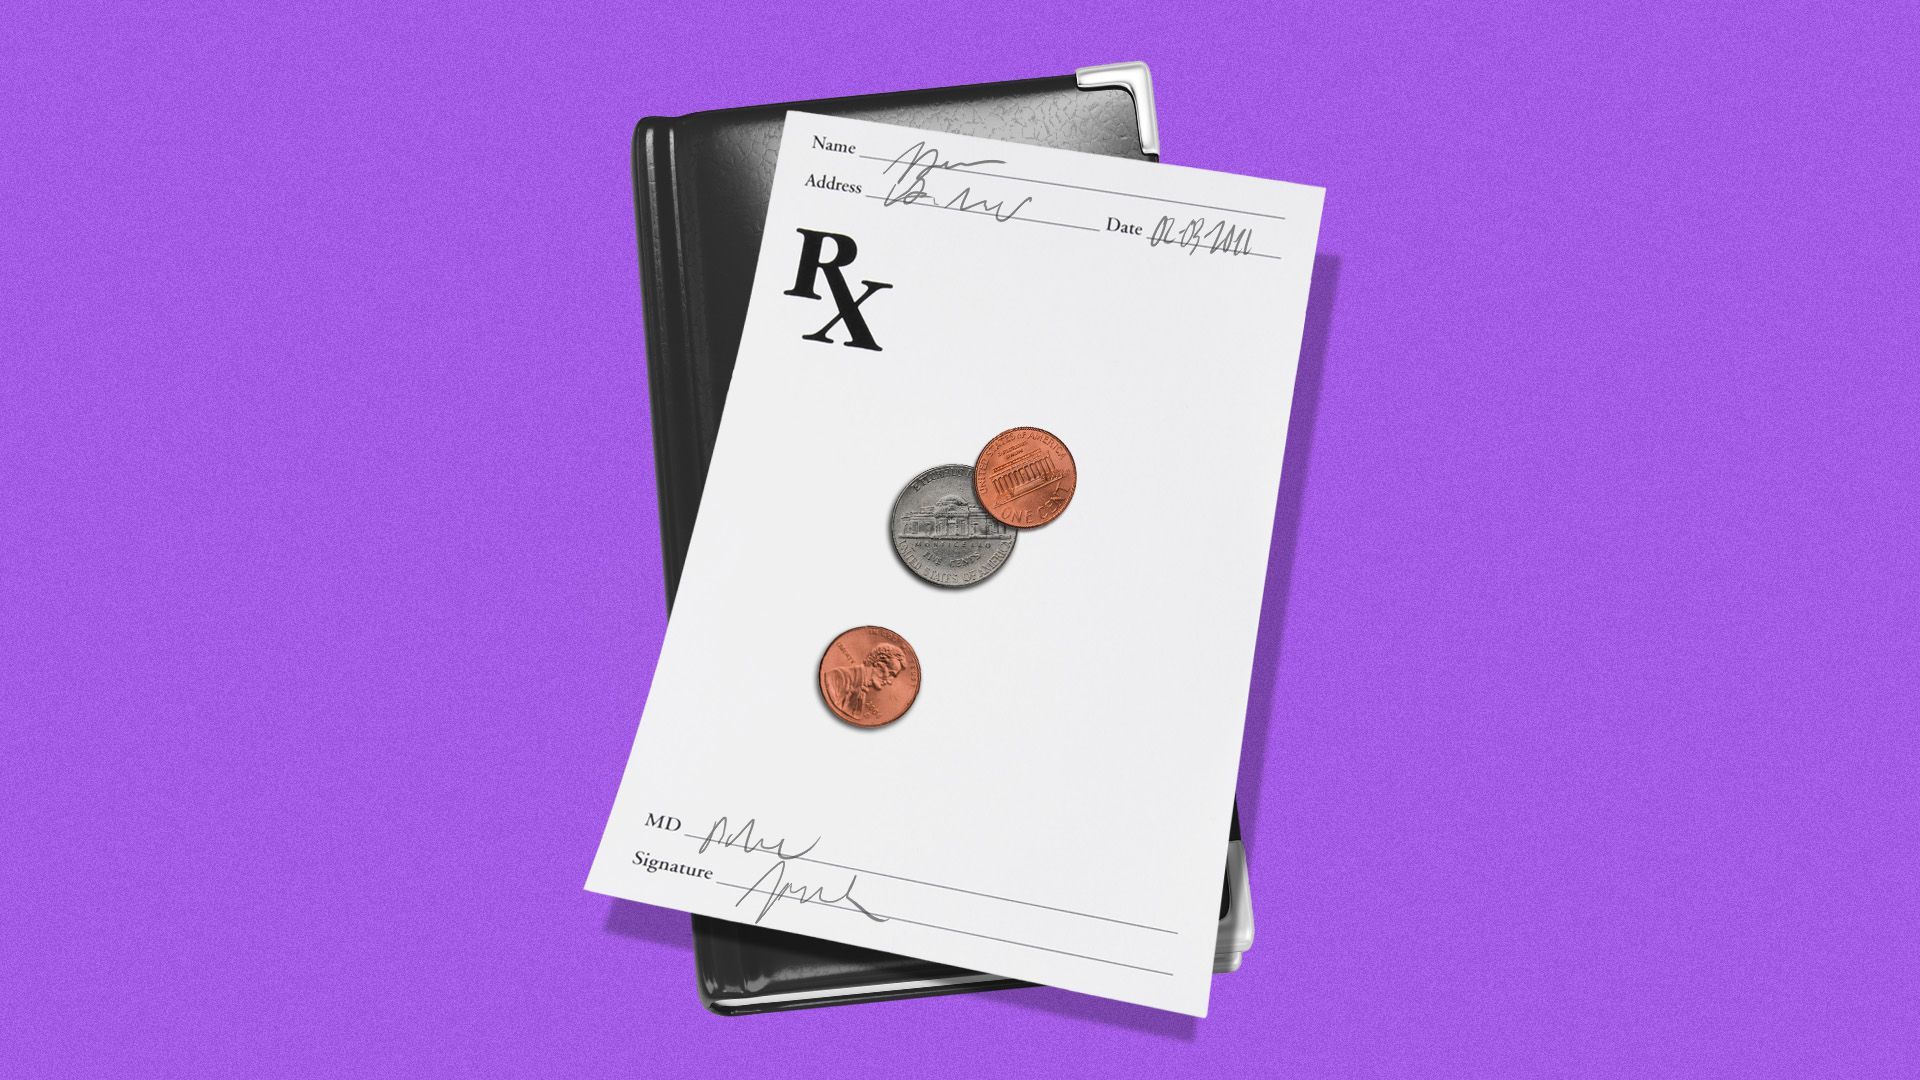 Illustration of a pharmacy script presented as a bill with change on it.